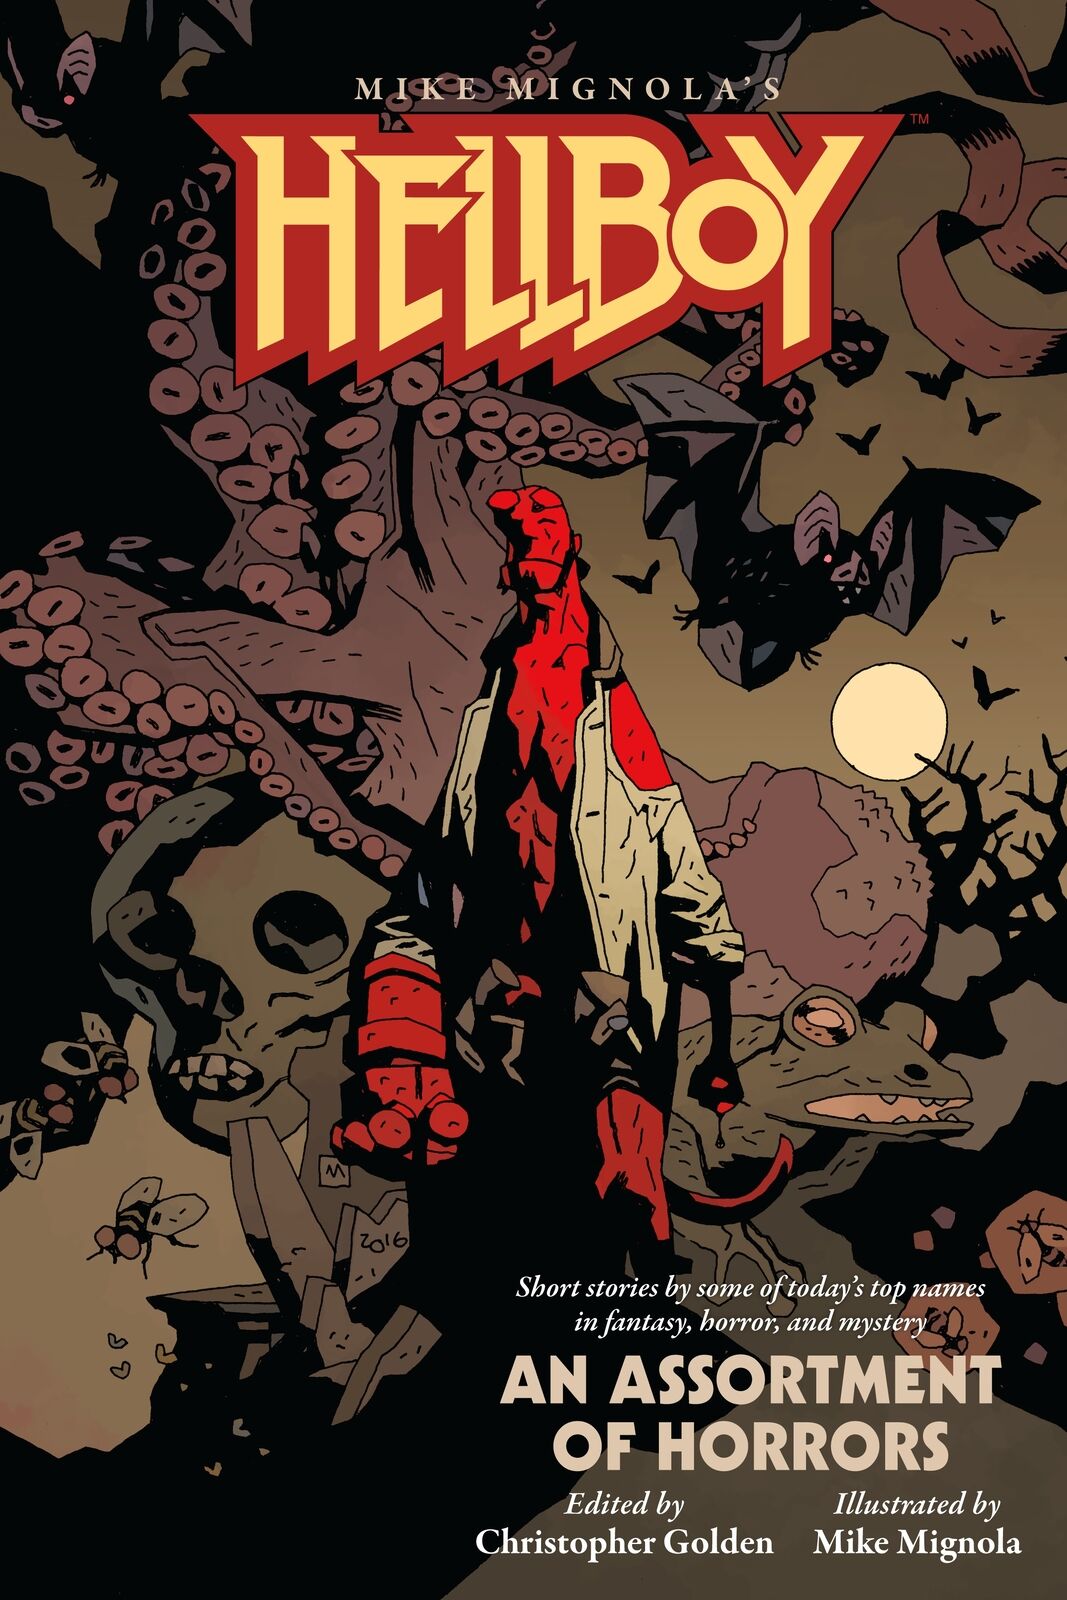 Hellboy: An Assortment of Horrors [Paperback] Mignola, Mike; Golden, Christopher